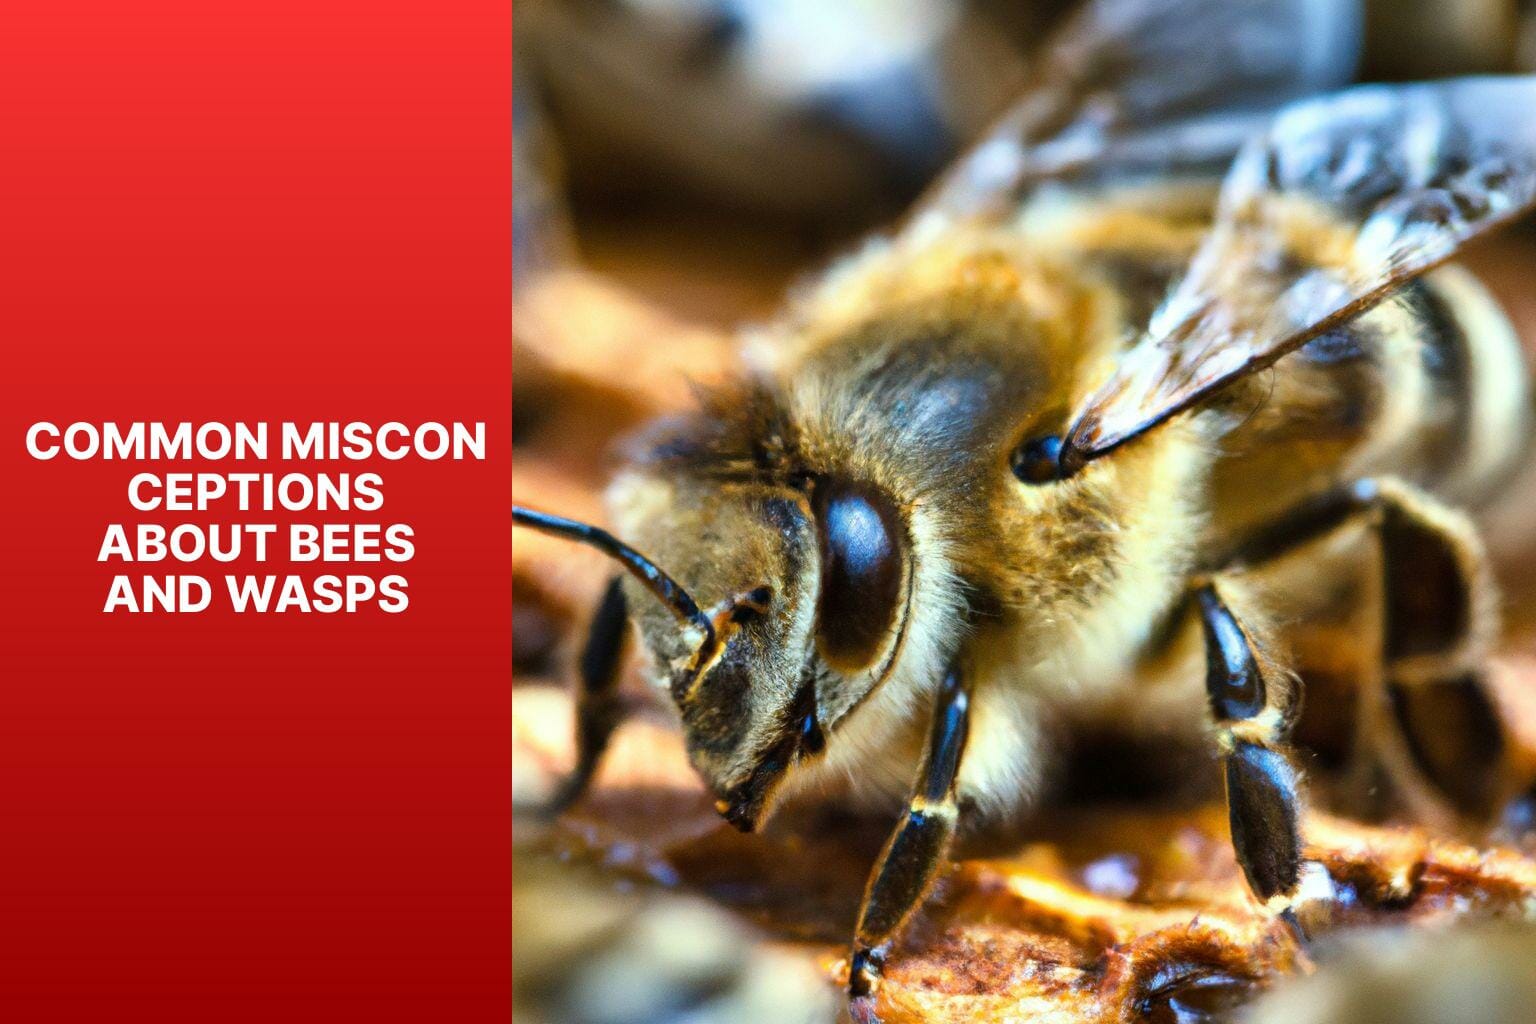 Common Misconceptions About Bees and Wasps - bees vs wasps 